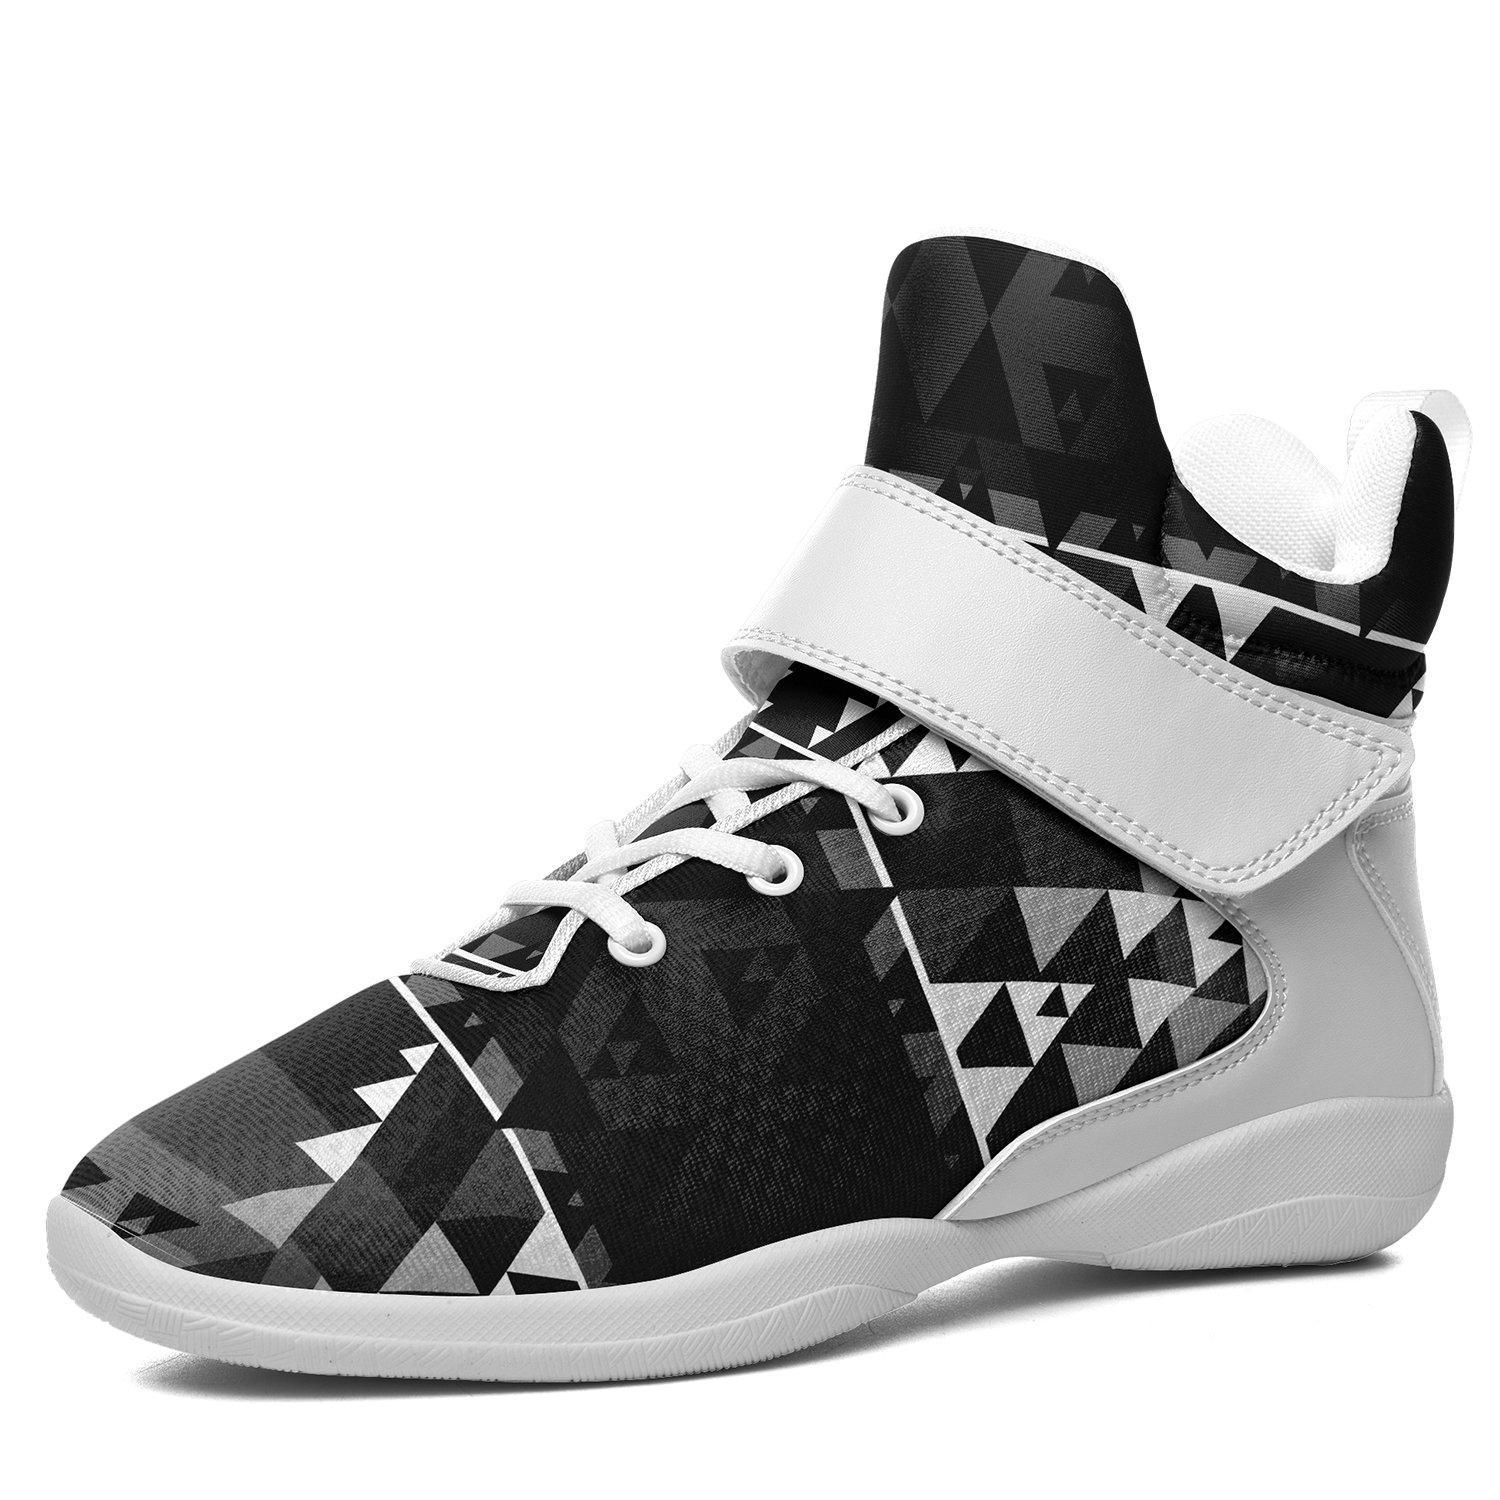 Writing on Stone Black and White Ipottaa Basketball / Sport High Top Shoes - White Sole 49 Dzine US Men 7 / EUR 40 White Sole with White Strap 